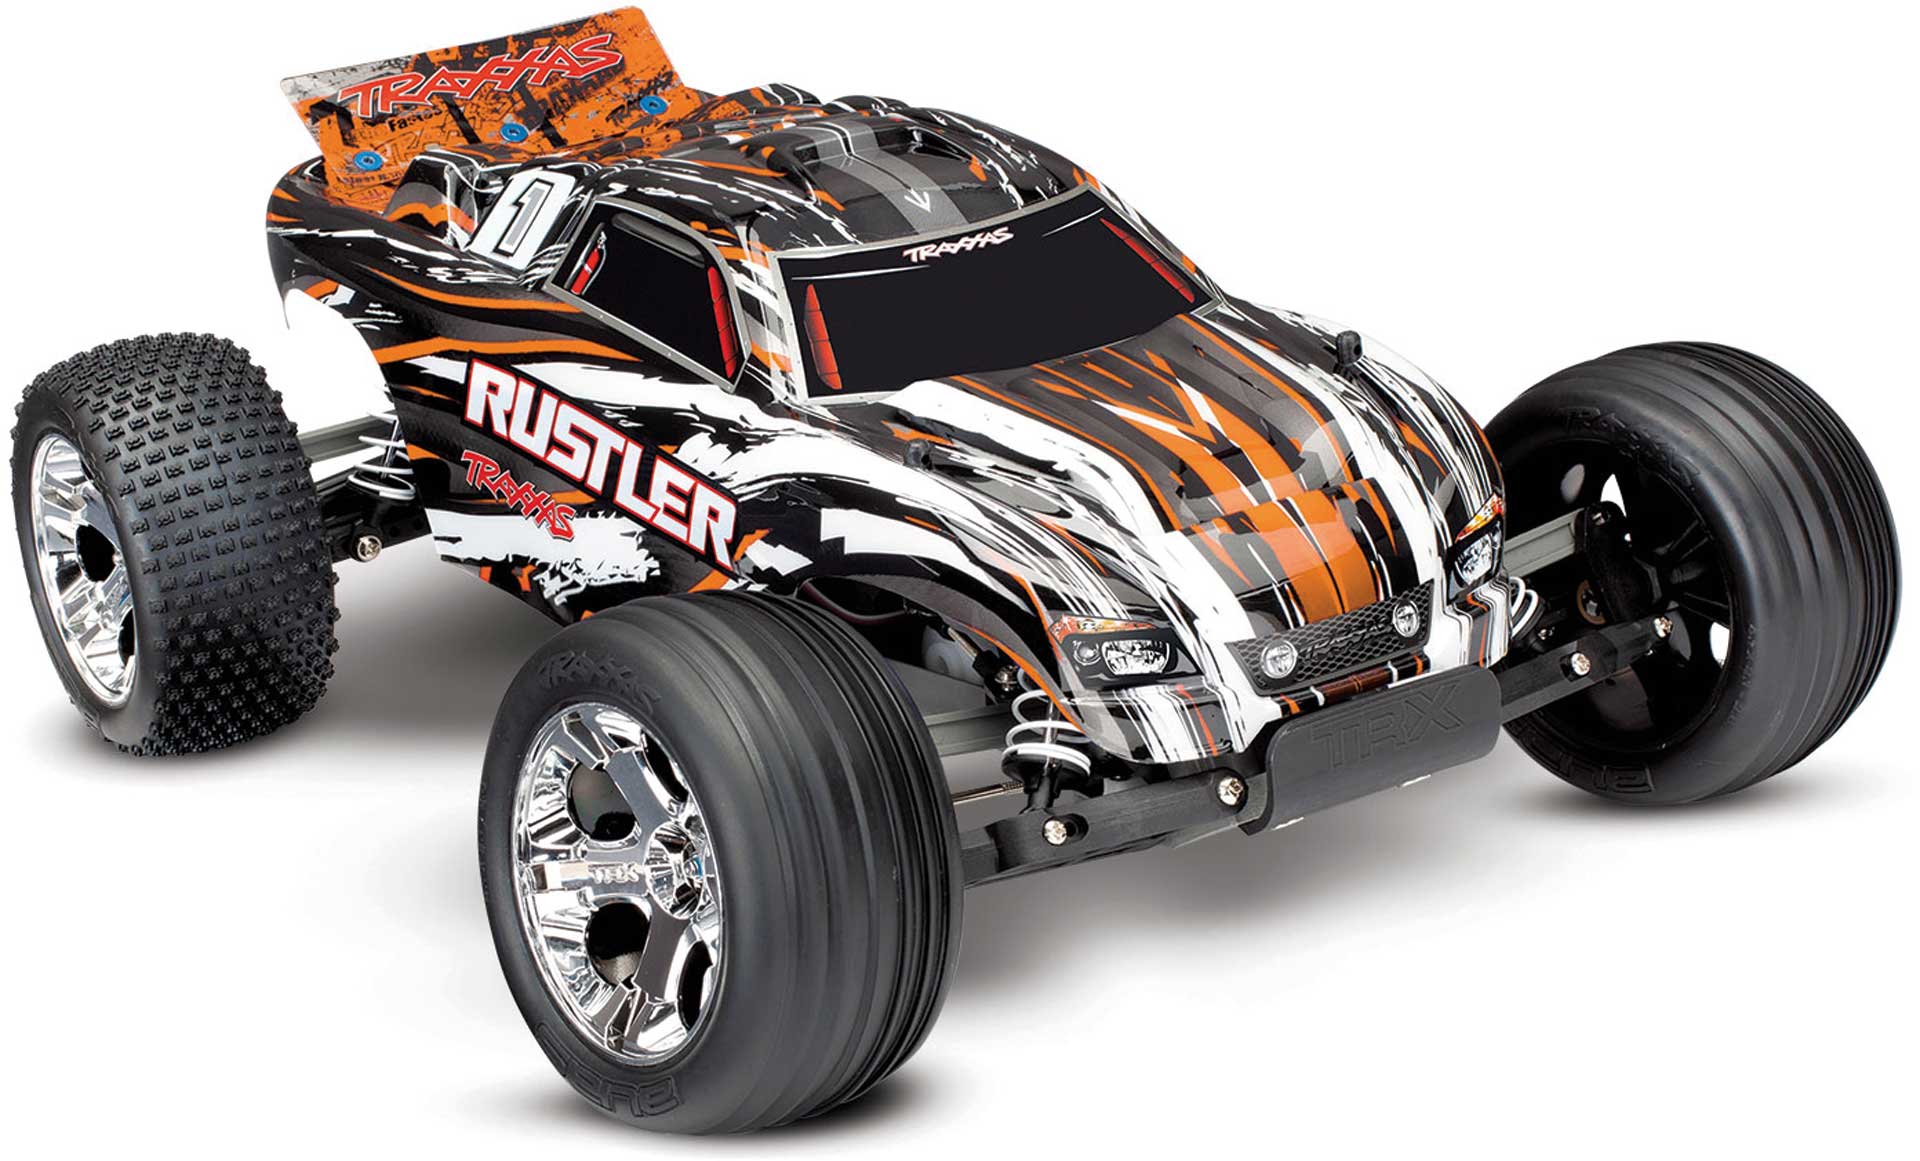 TRAXXAS RUSTLER ORANGE RTR SANS ACCU /CHARGEUR 1/10 2WD MONSTER TRUCK BRUSHED